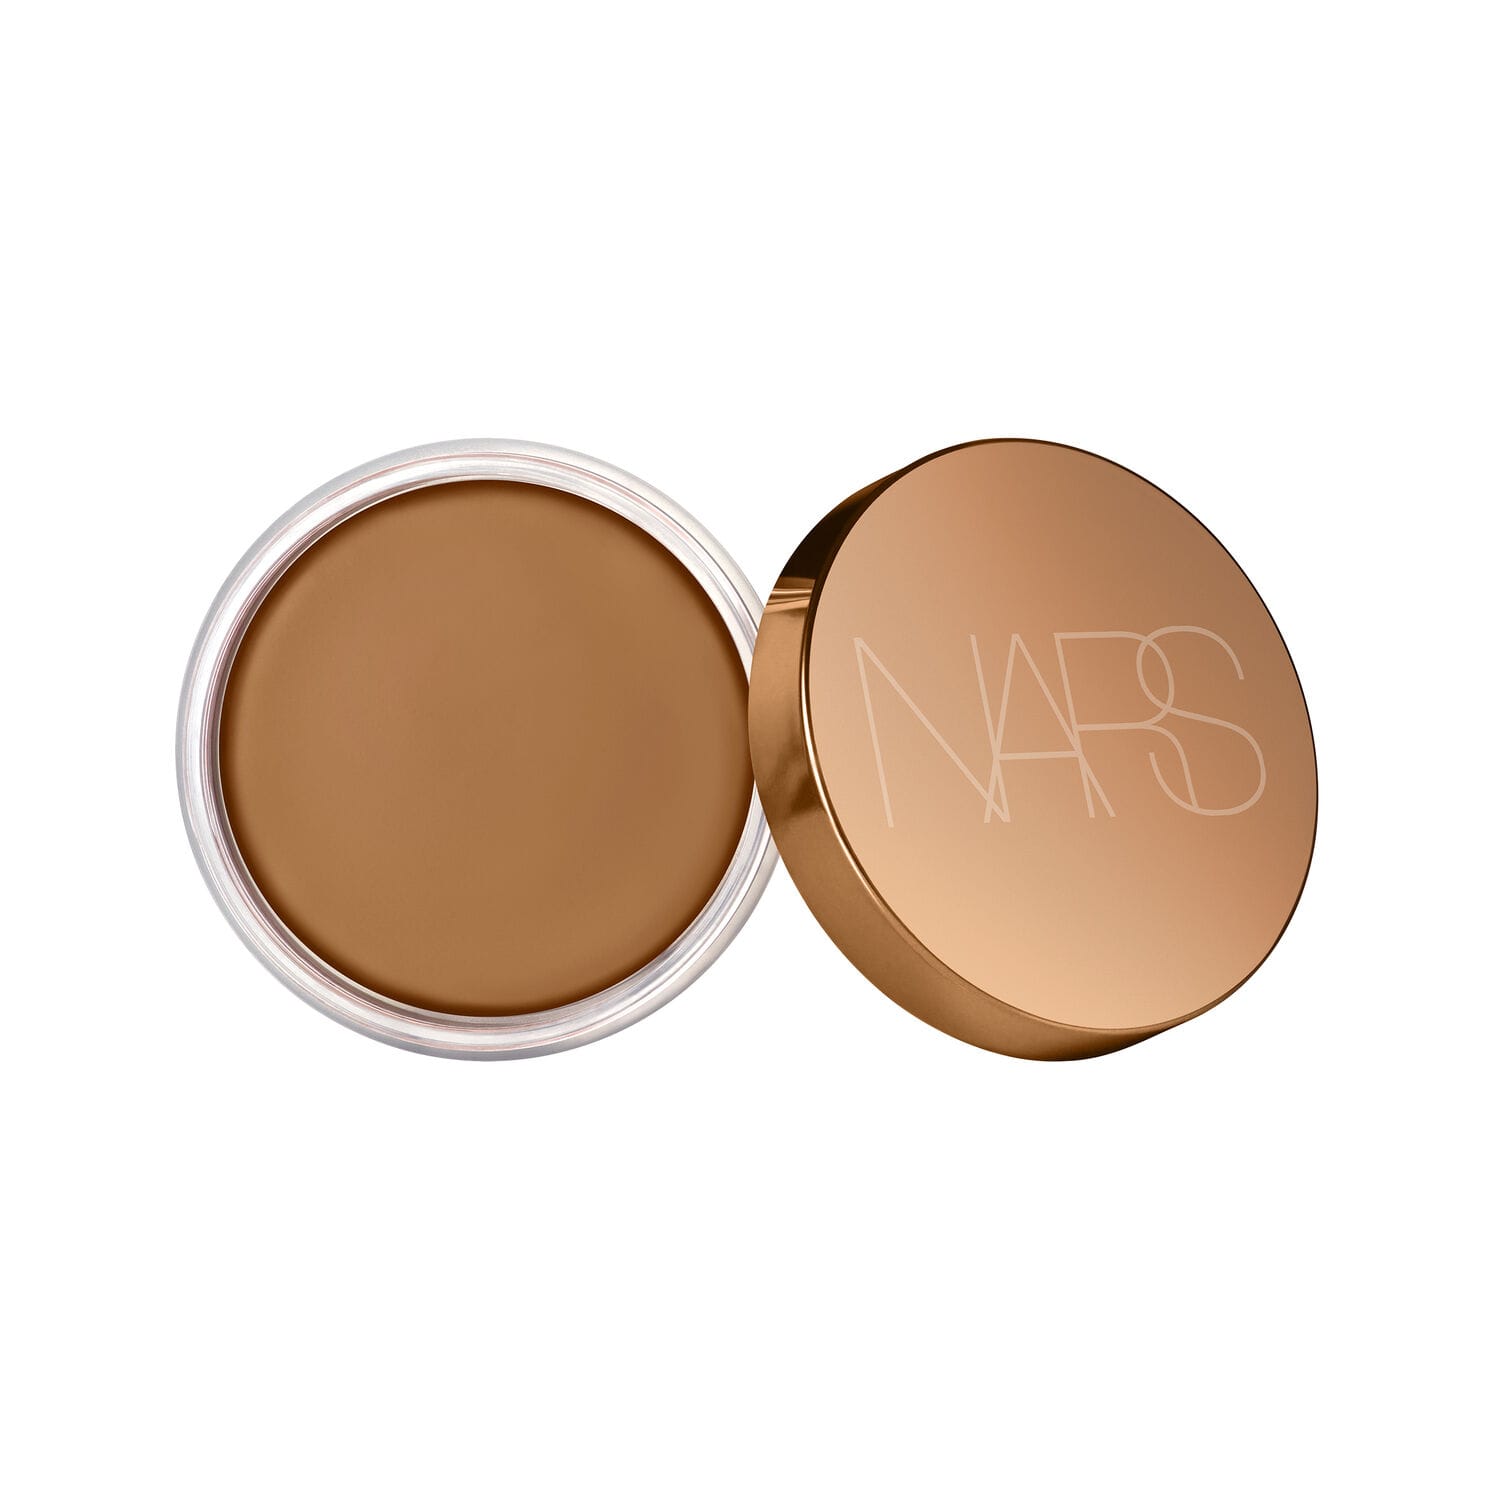 Mineral Bronzers - Clean, Non-Toxic Bronzers